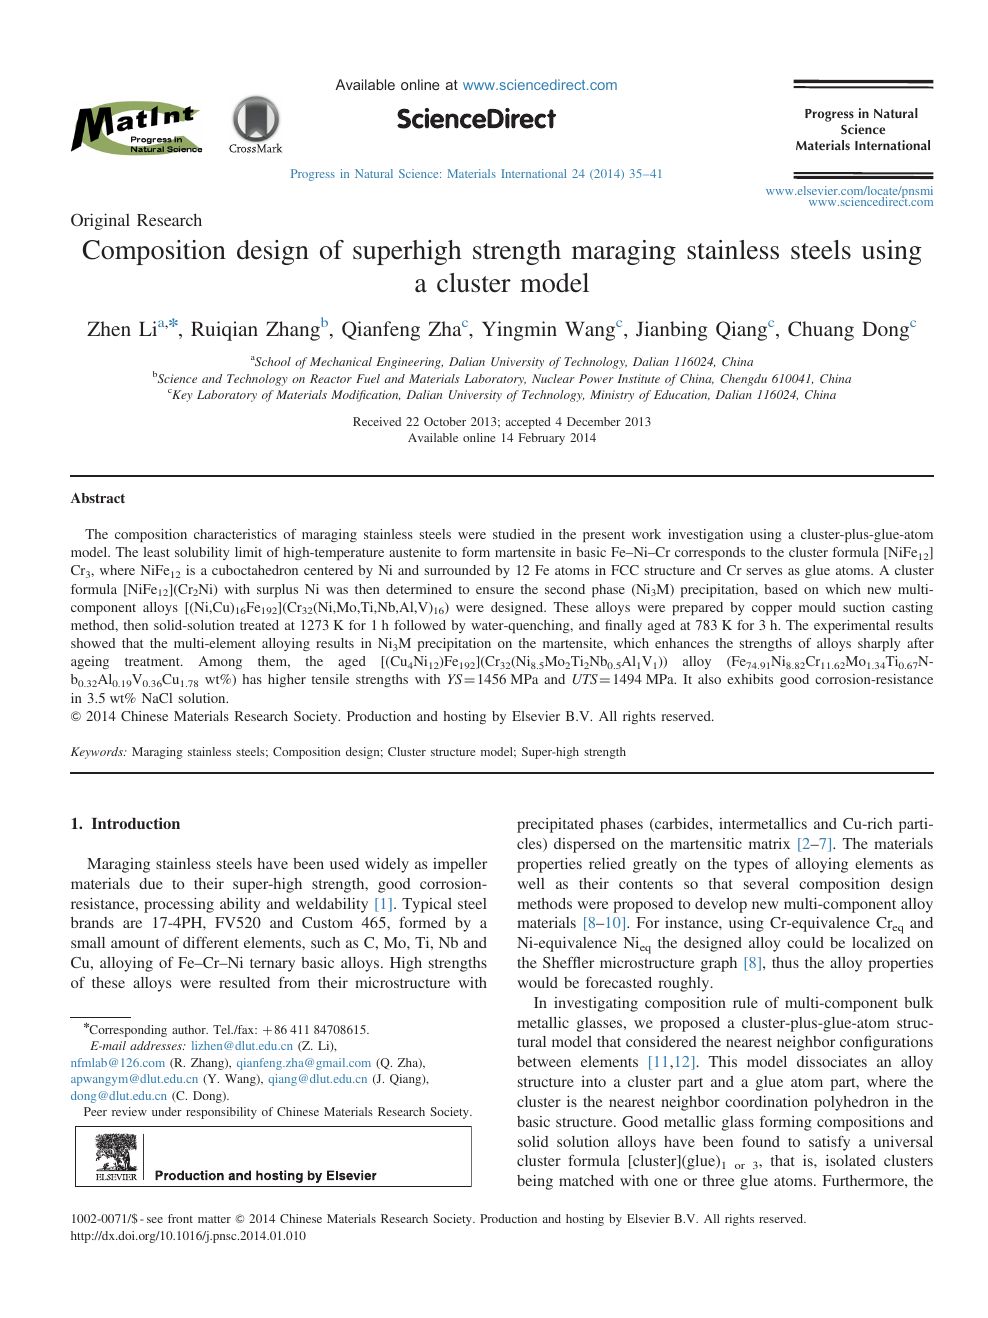 Composition Design Of Superhigh Strength Maraging Stainless Steels Using A Cluster Model Topic Of Research Paper In Materials Engineering Download Scholarly Article Pdf And Read For Free On Cyberleninka Open Science